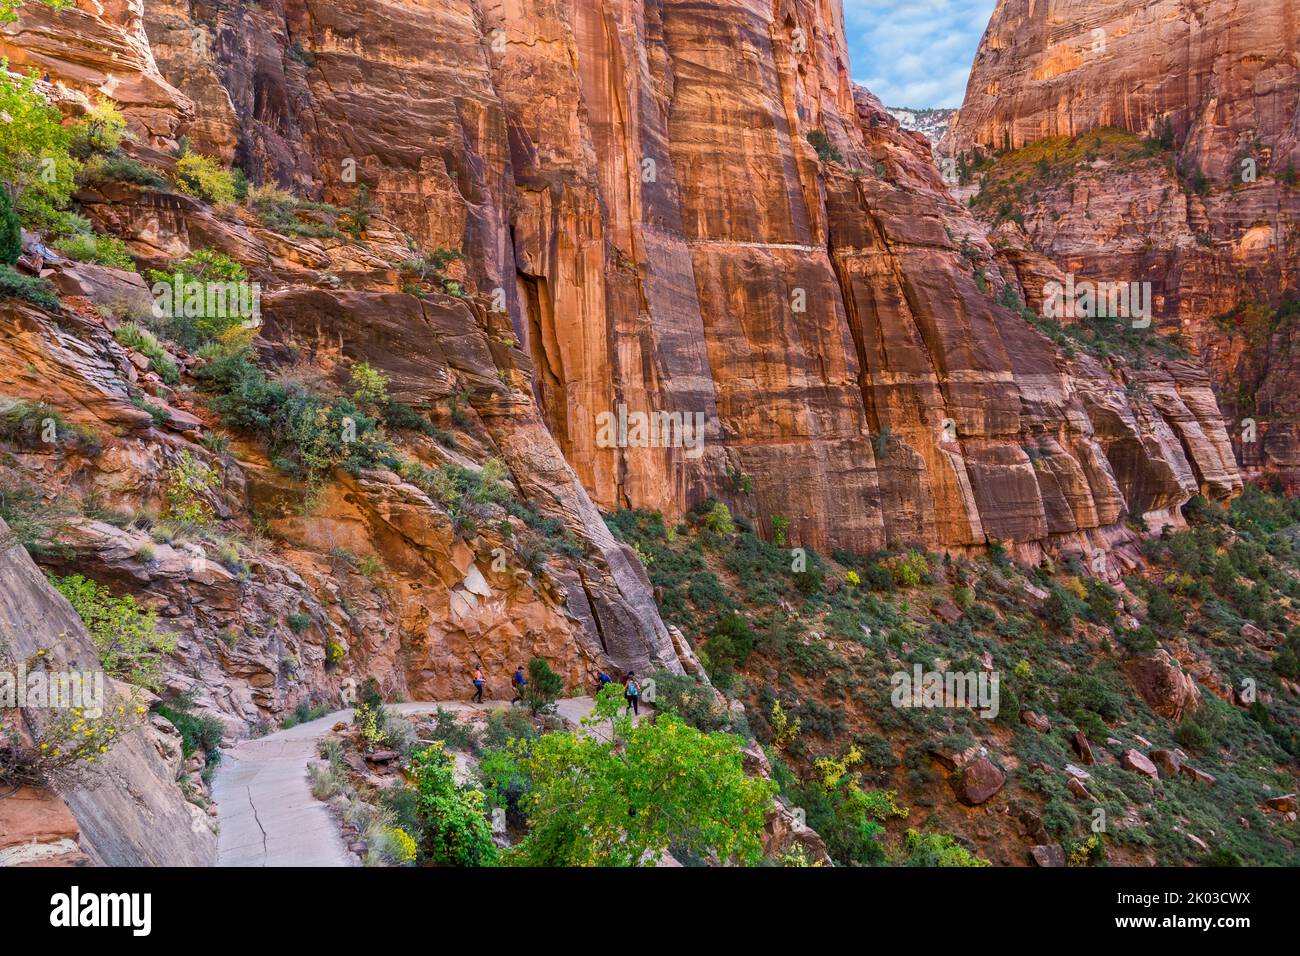 Zion National Park is located in southwestern Utah on the border with Arizona. It has an area of 579 kö² and lies between 1128 m and 2660 m altitude. West Rim Trail, Fridge Canyon Stock Photo